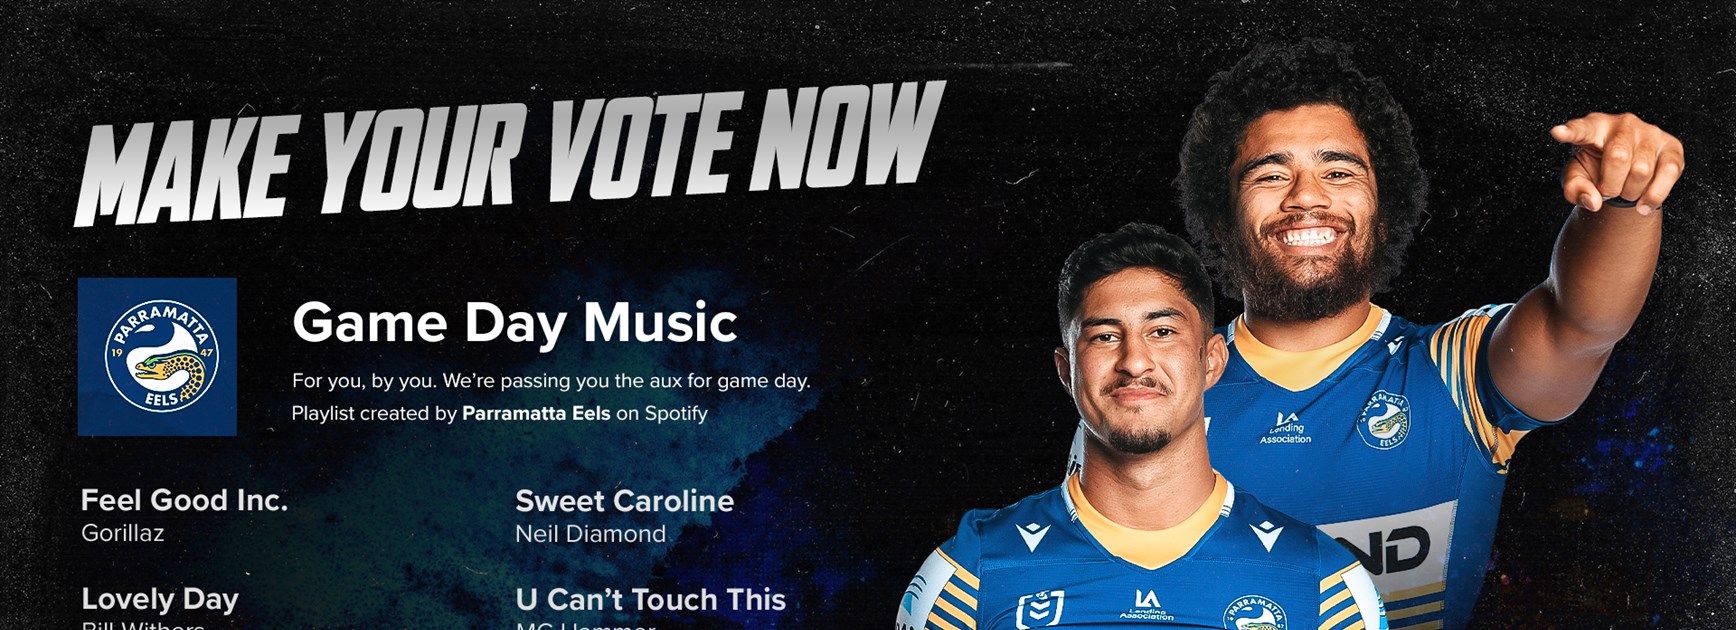 Game Day Music Fan Vote